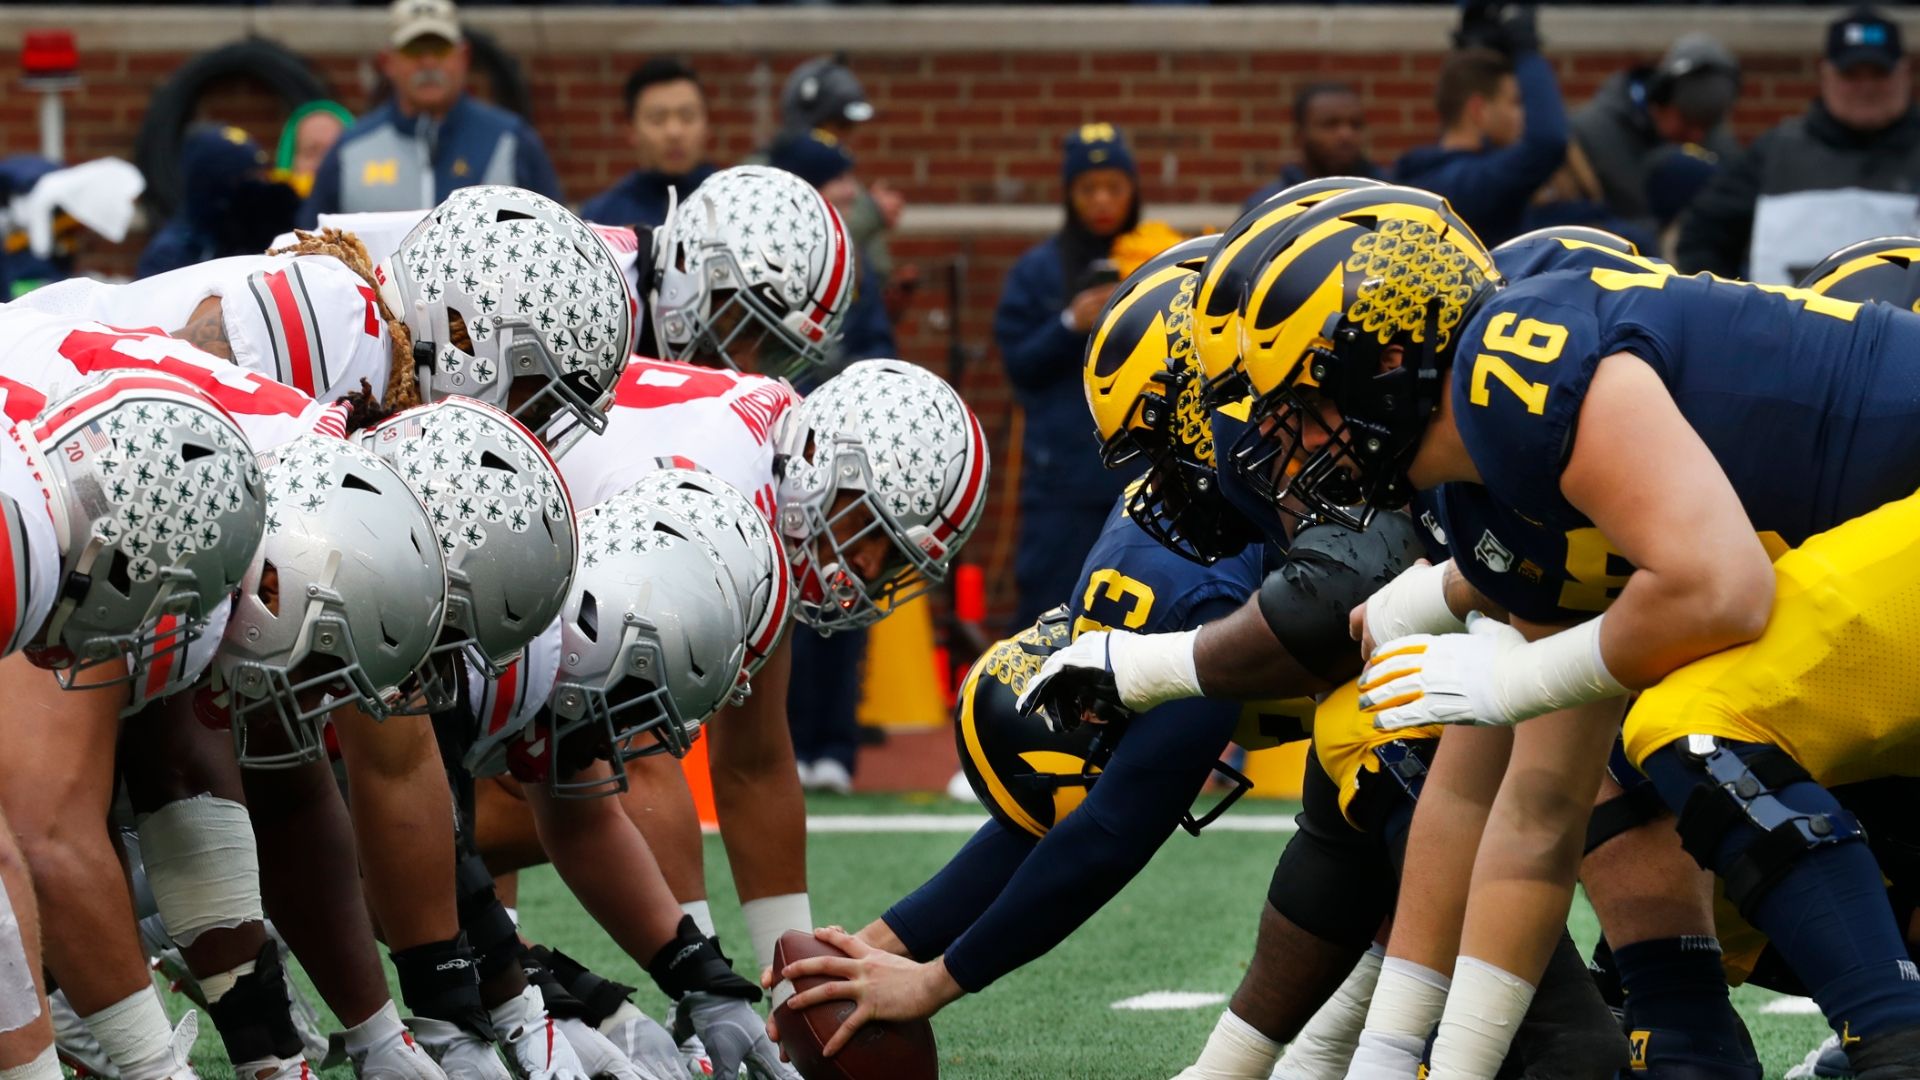 Ohio StateMichigan is off, check out heated moments from the rivalry